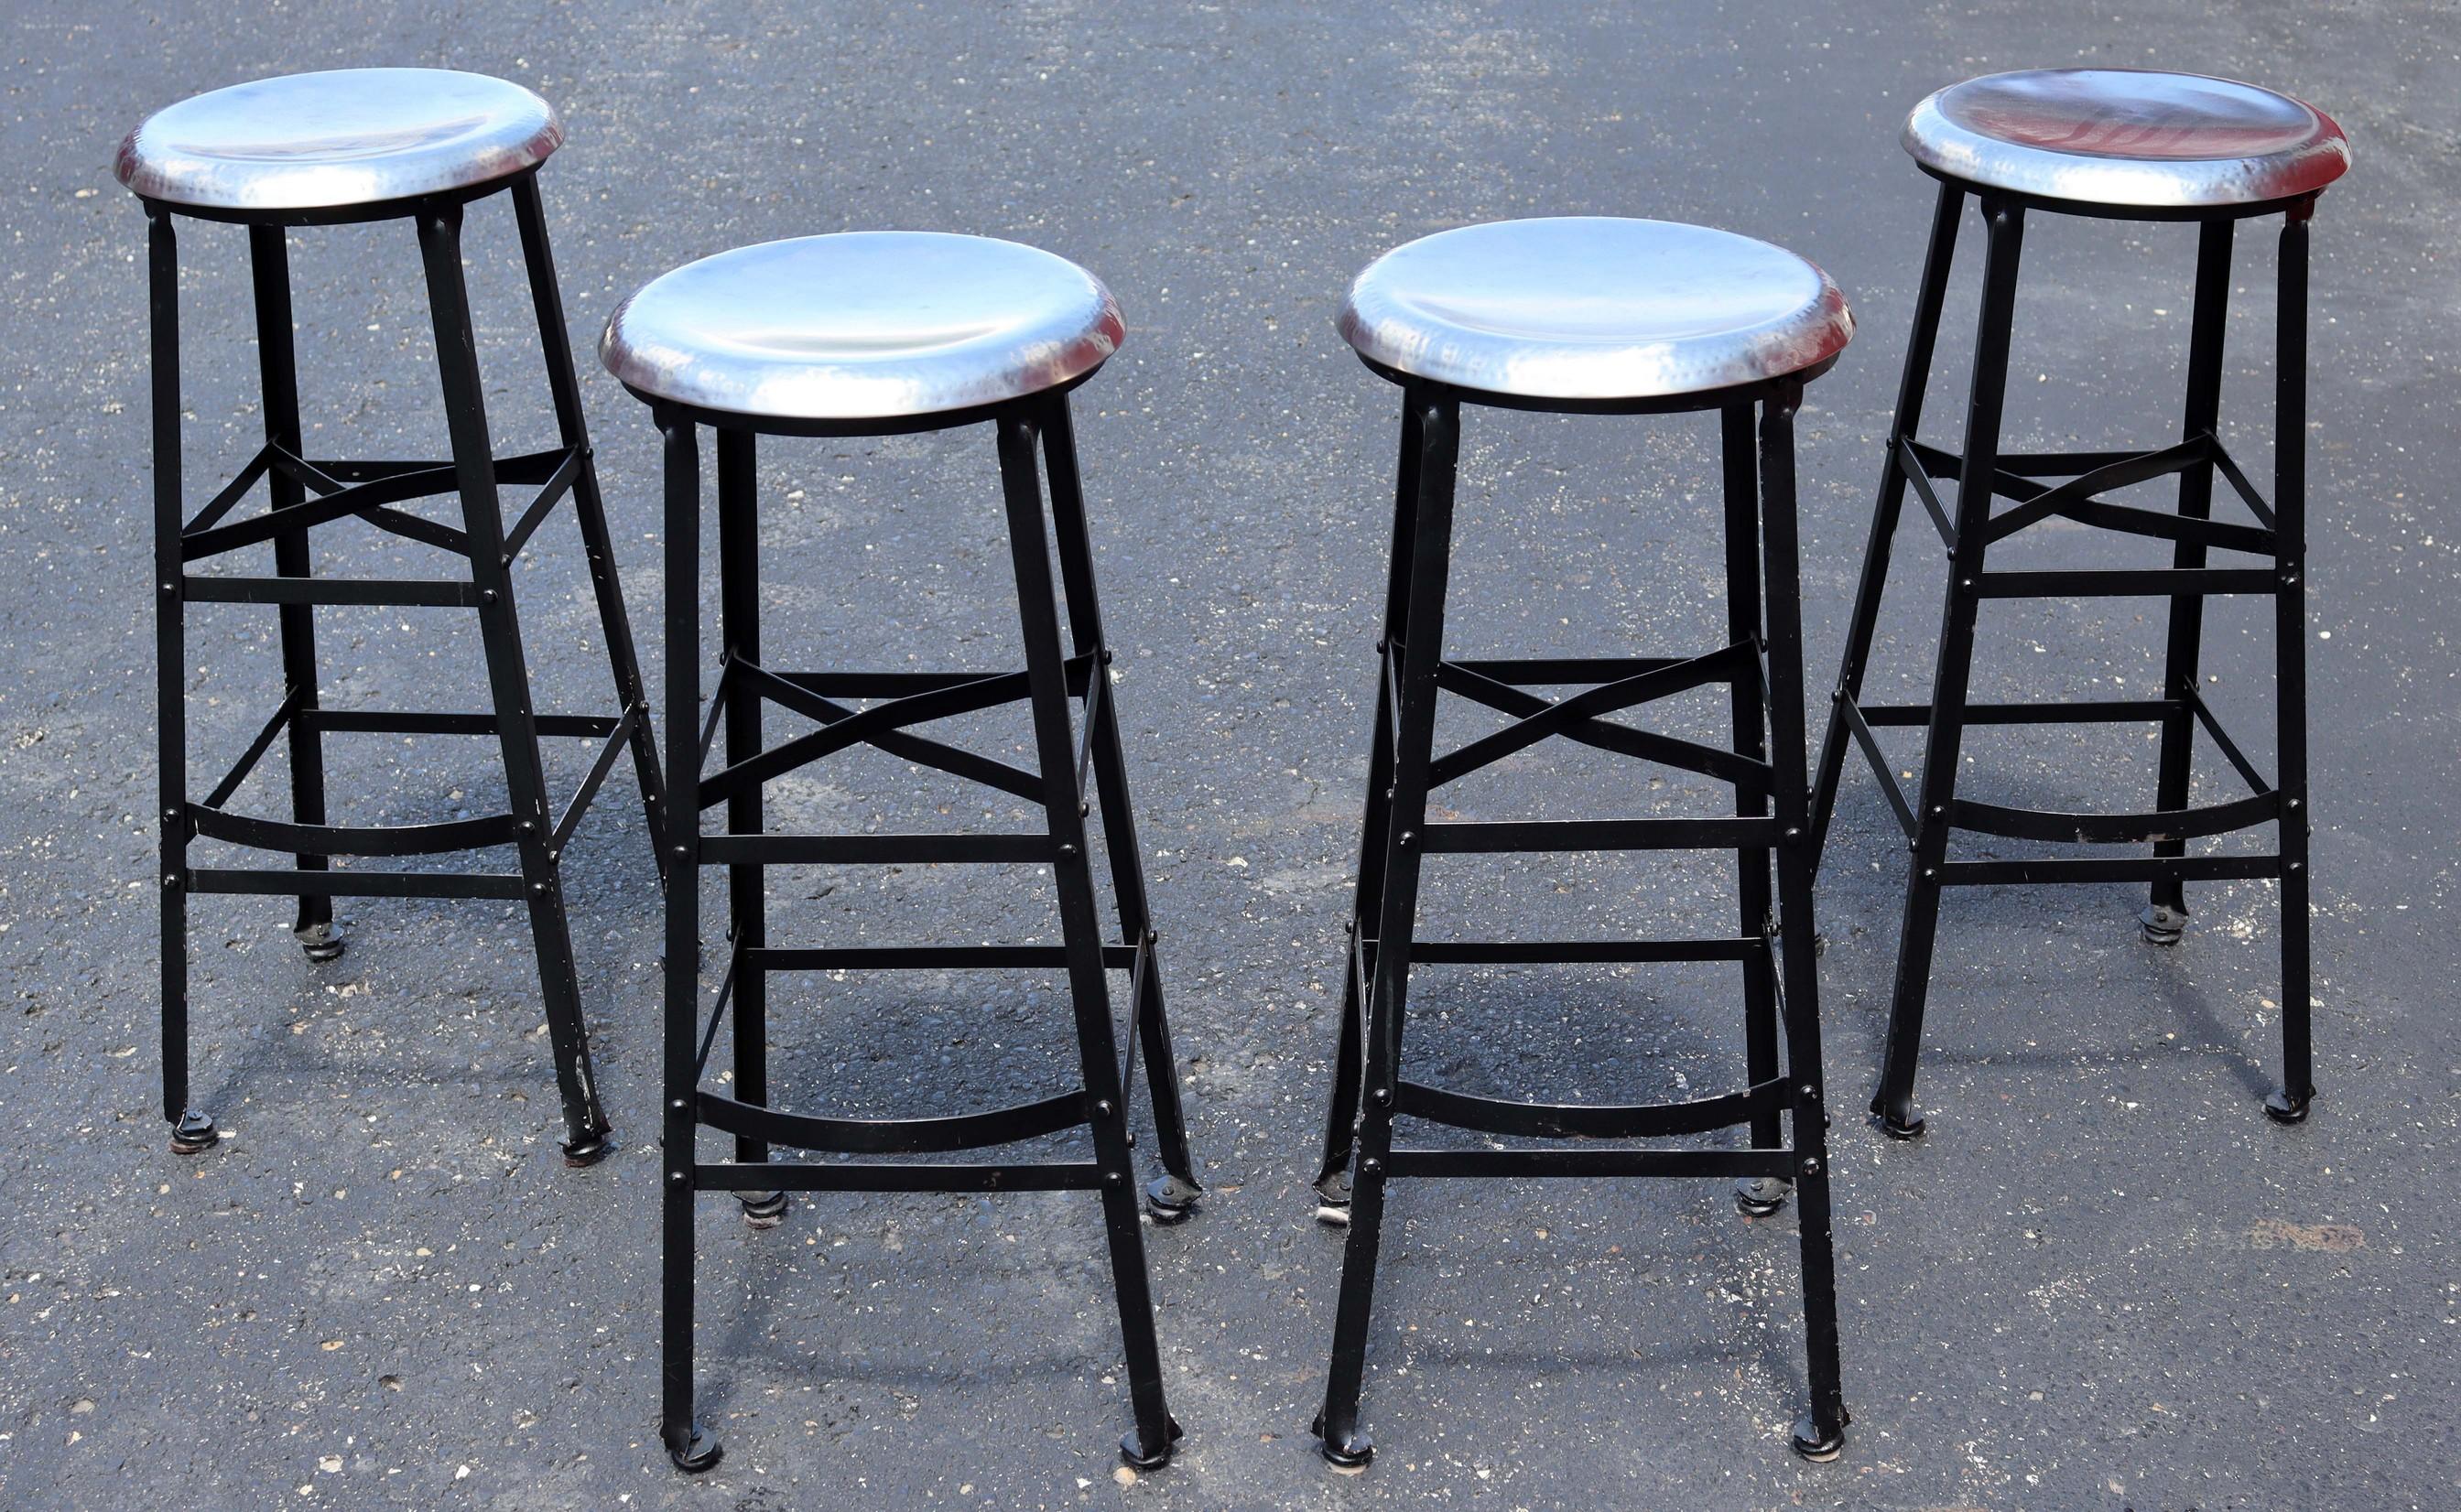 For your consideration is a minimalist set of four bar or counter stools, with black painted metal bases and chrome finish seats. In good condition. 14